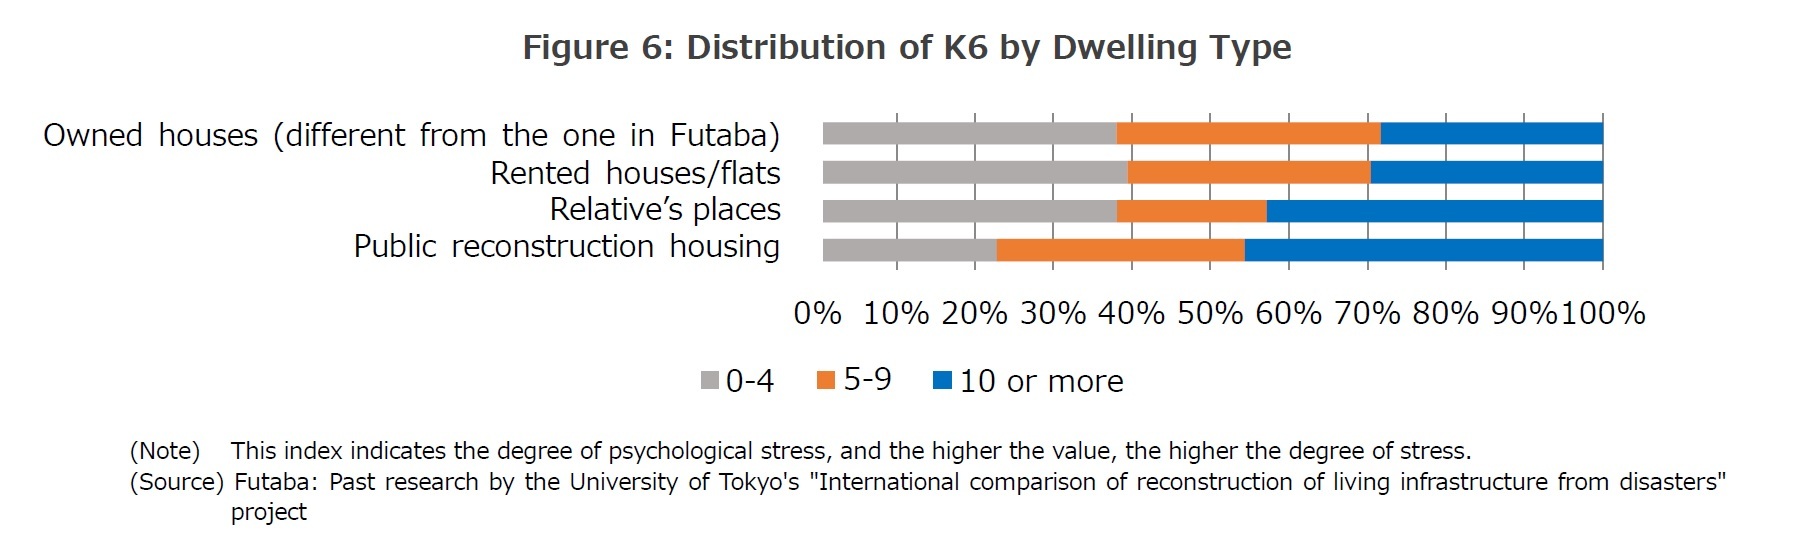 Figure 6: Distribution of K6 by Dwelling Type